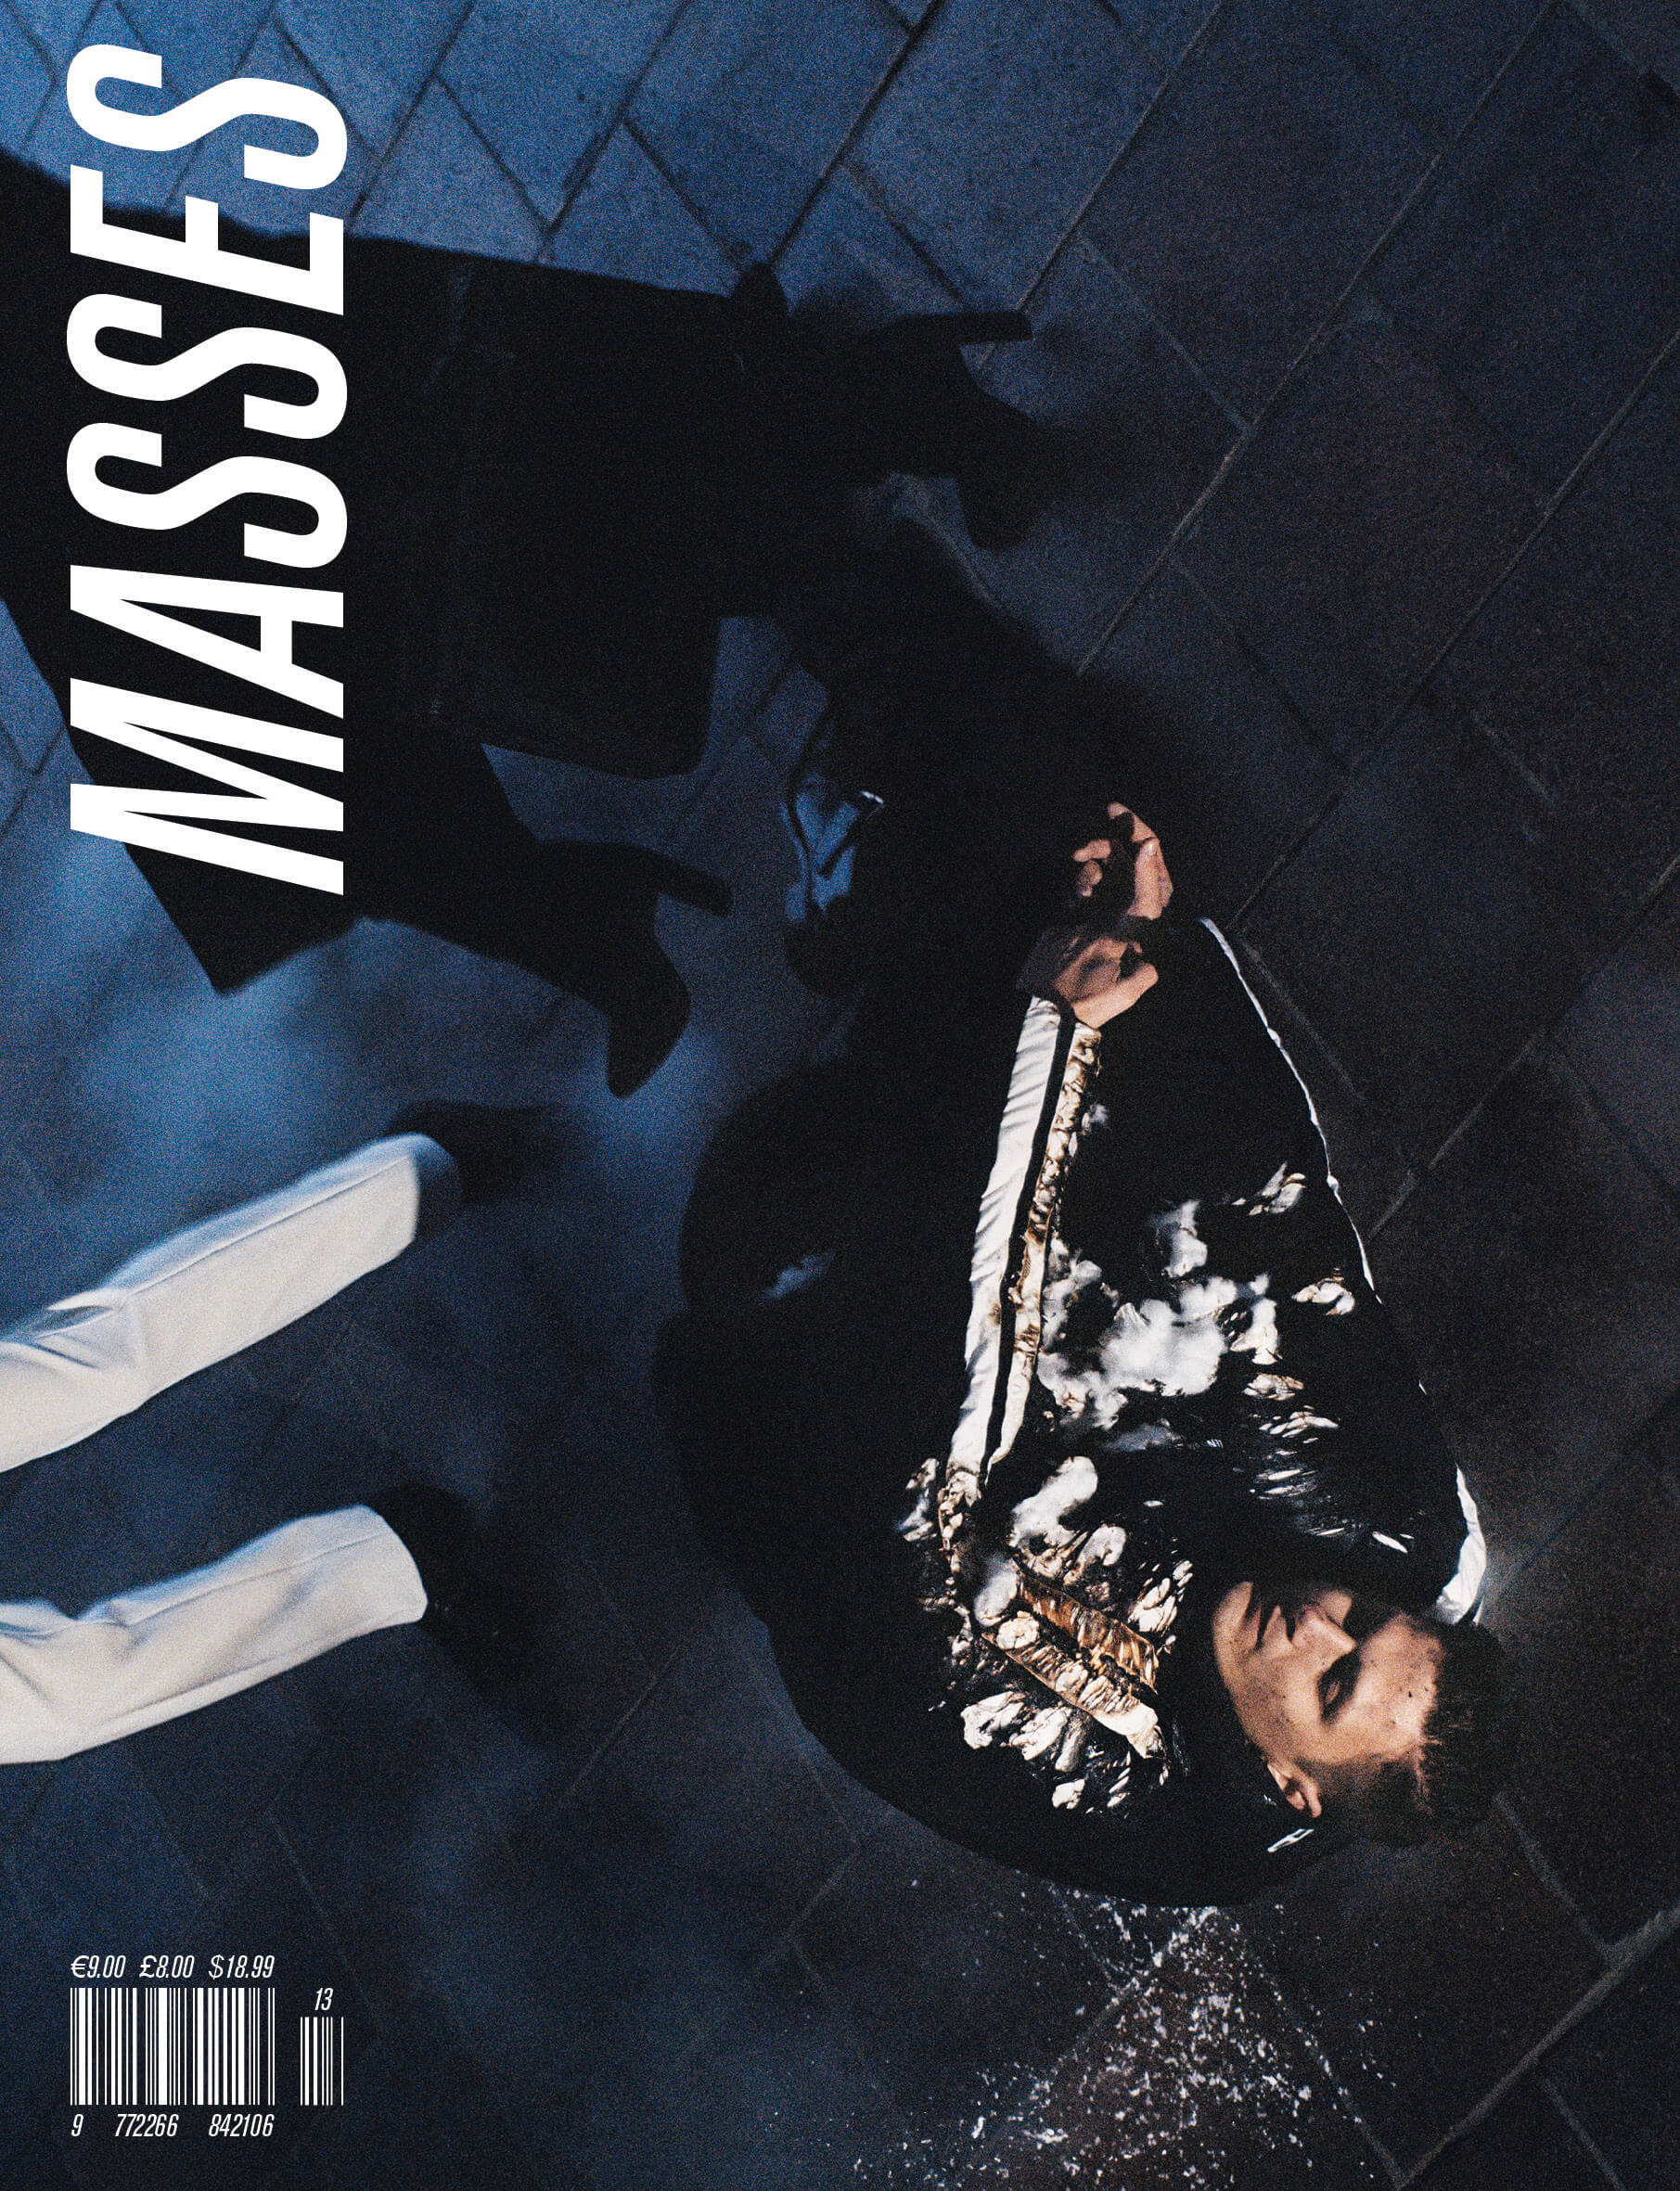 MASSES Magazine Issue No. 13 – Cover photographed by CG Watkins with Petr from Czech Stunts wearing Balenciaga by Demna Gvasalia Summer 2020 and bystanders wearing Saint Laurent by Anthony Vaccarello Summer 2020